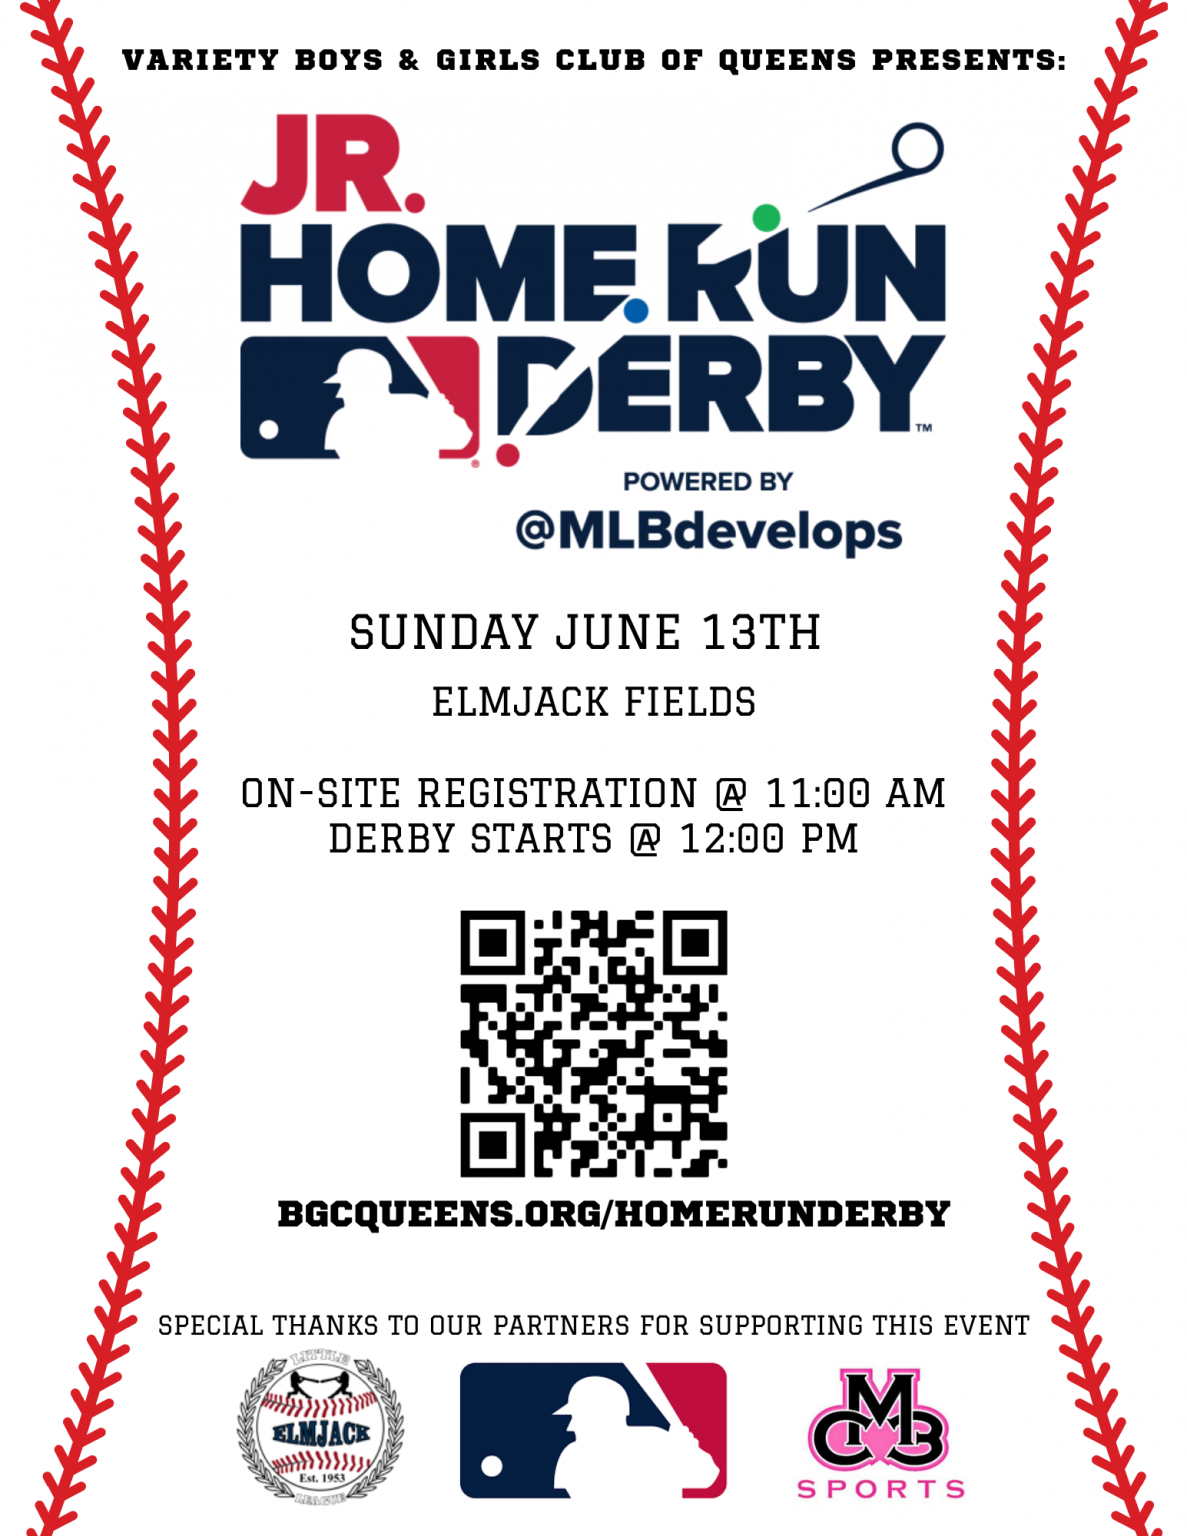 Major League Baseball And Queens Non Profit to Hold 'Home Run Derby